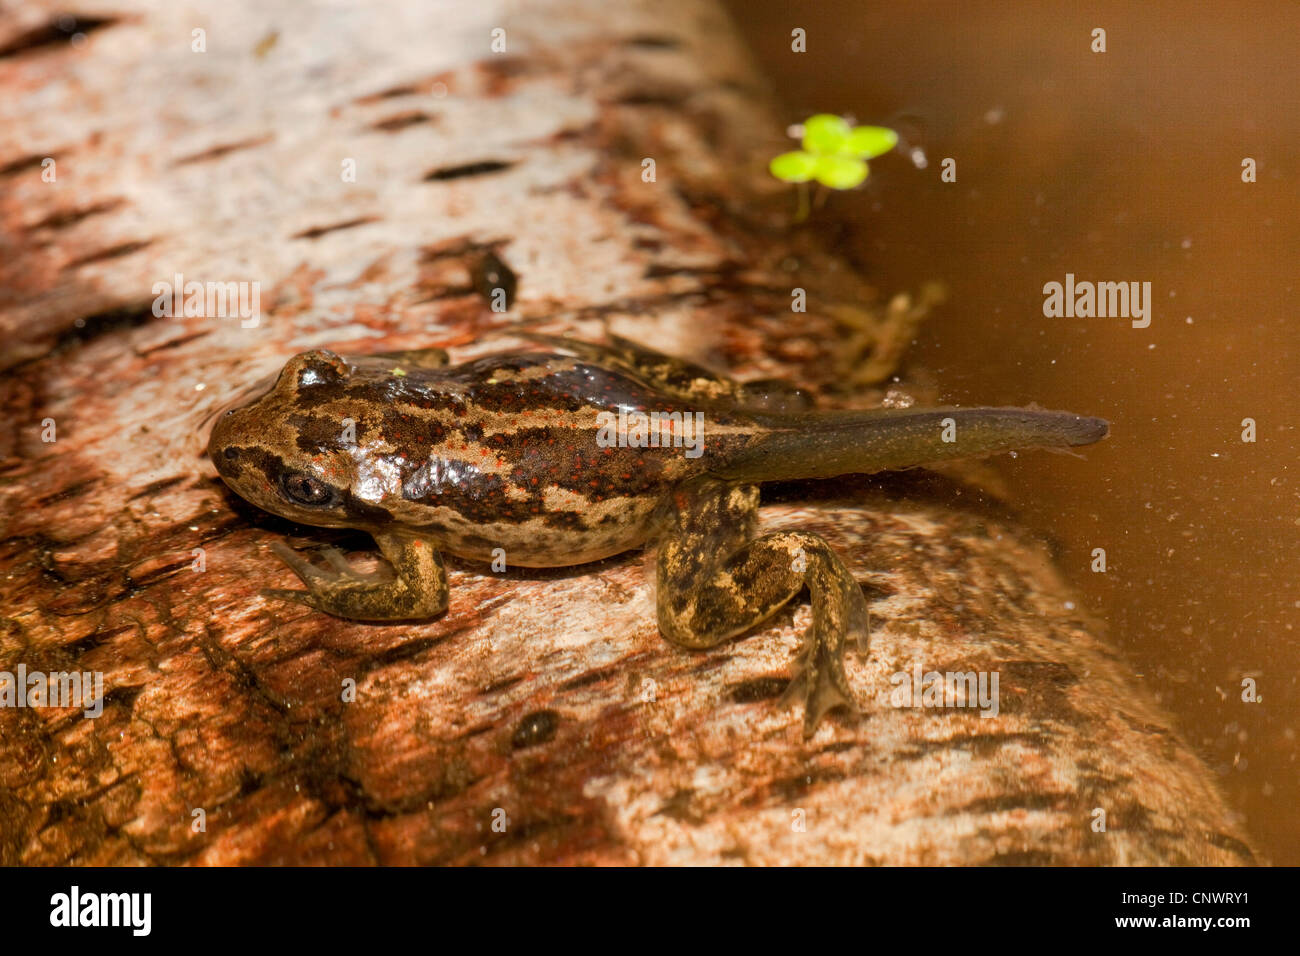 common spadefoot, garlic toad (Pelobates fuscus), juvenile going ashore after the methamorphosis, Germany Stock Photo